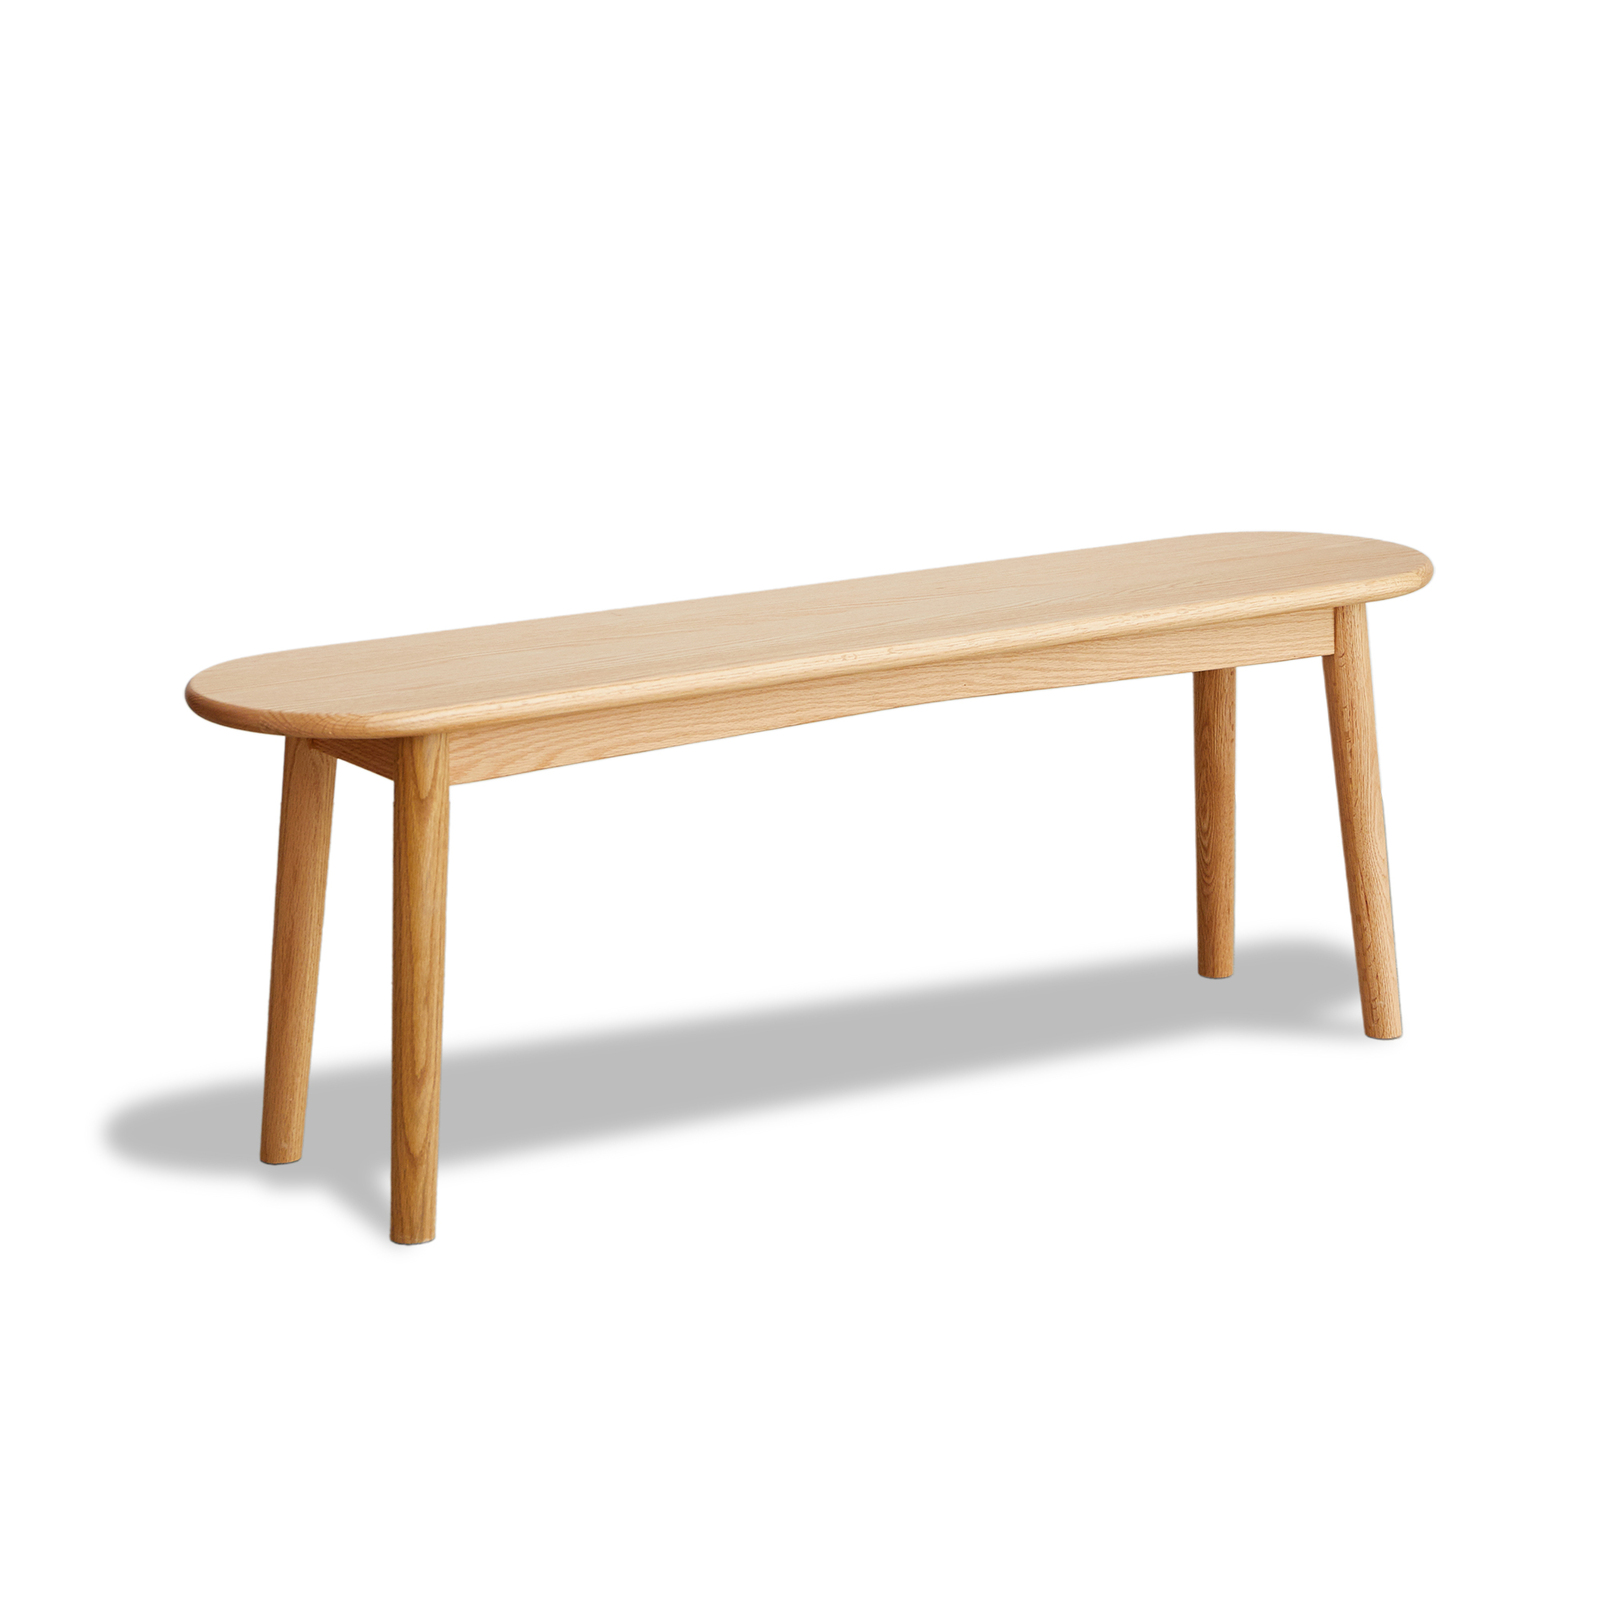 MIUZ Dining Bench Solid Timber American White Oak Wood Kitchen Entryway Bedroom